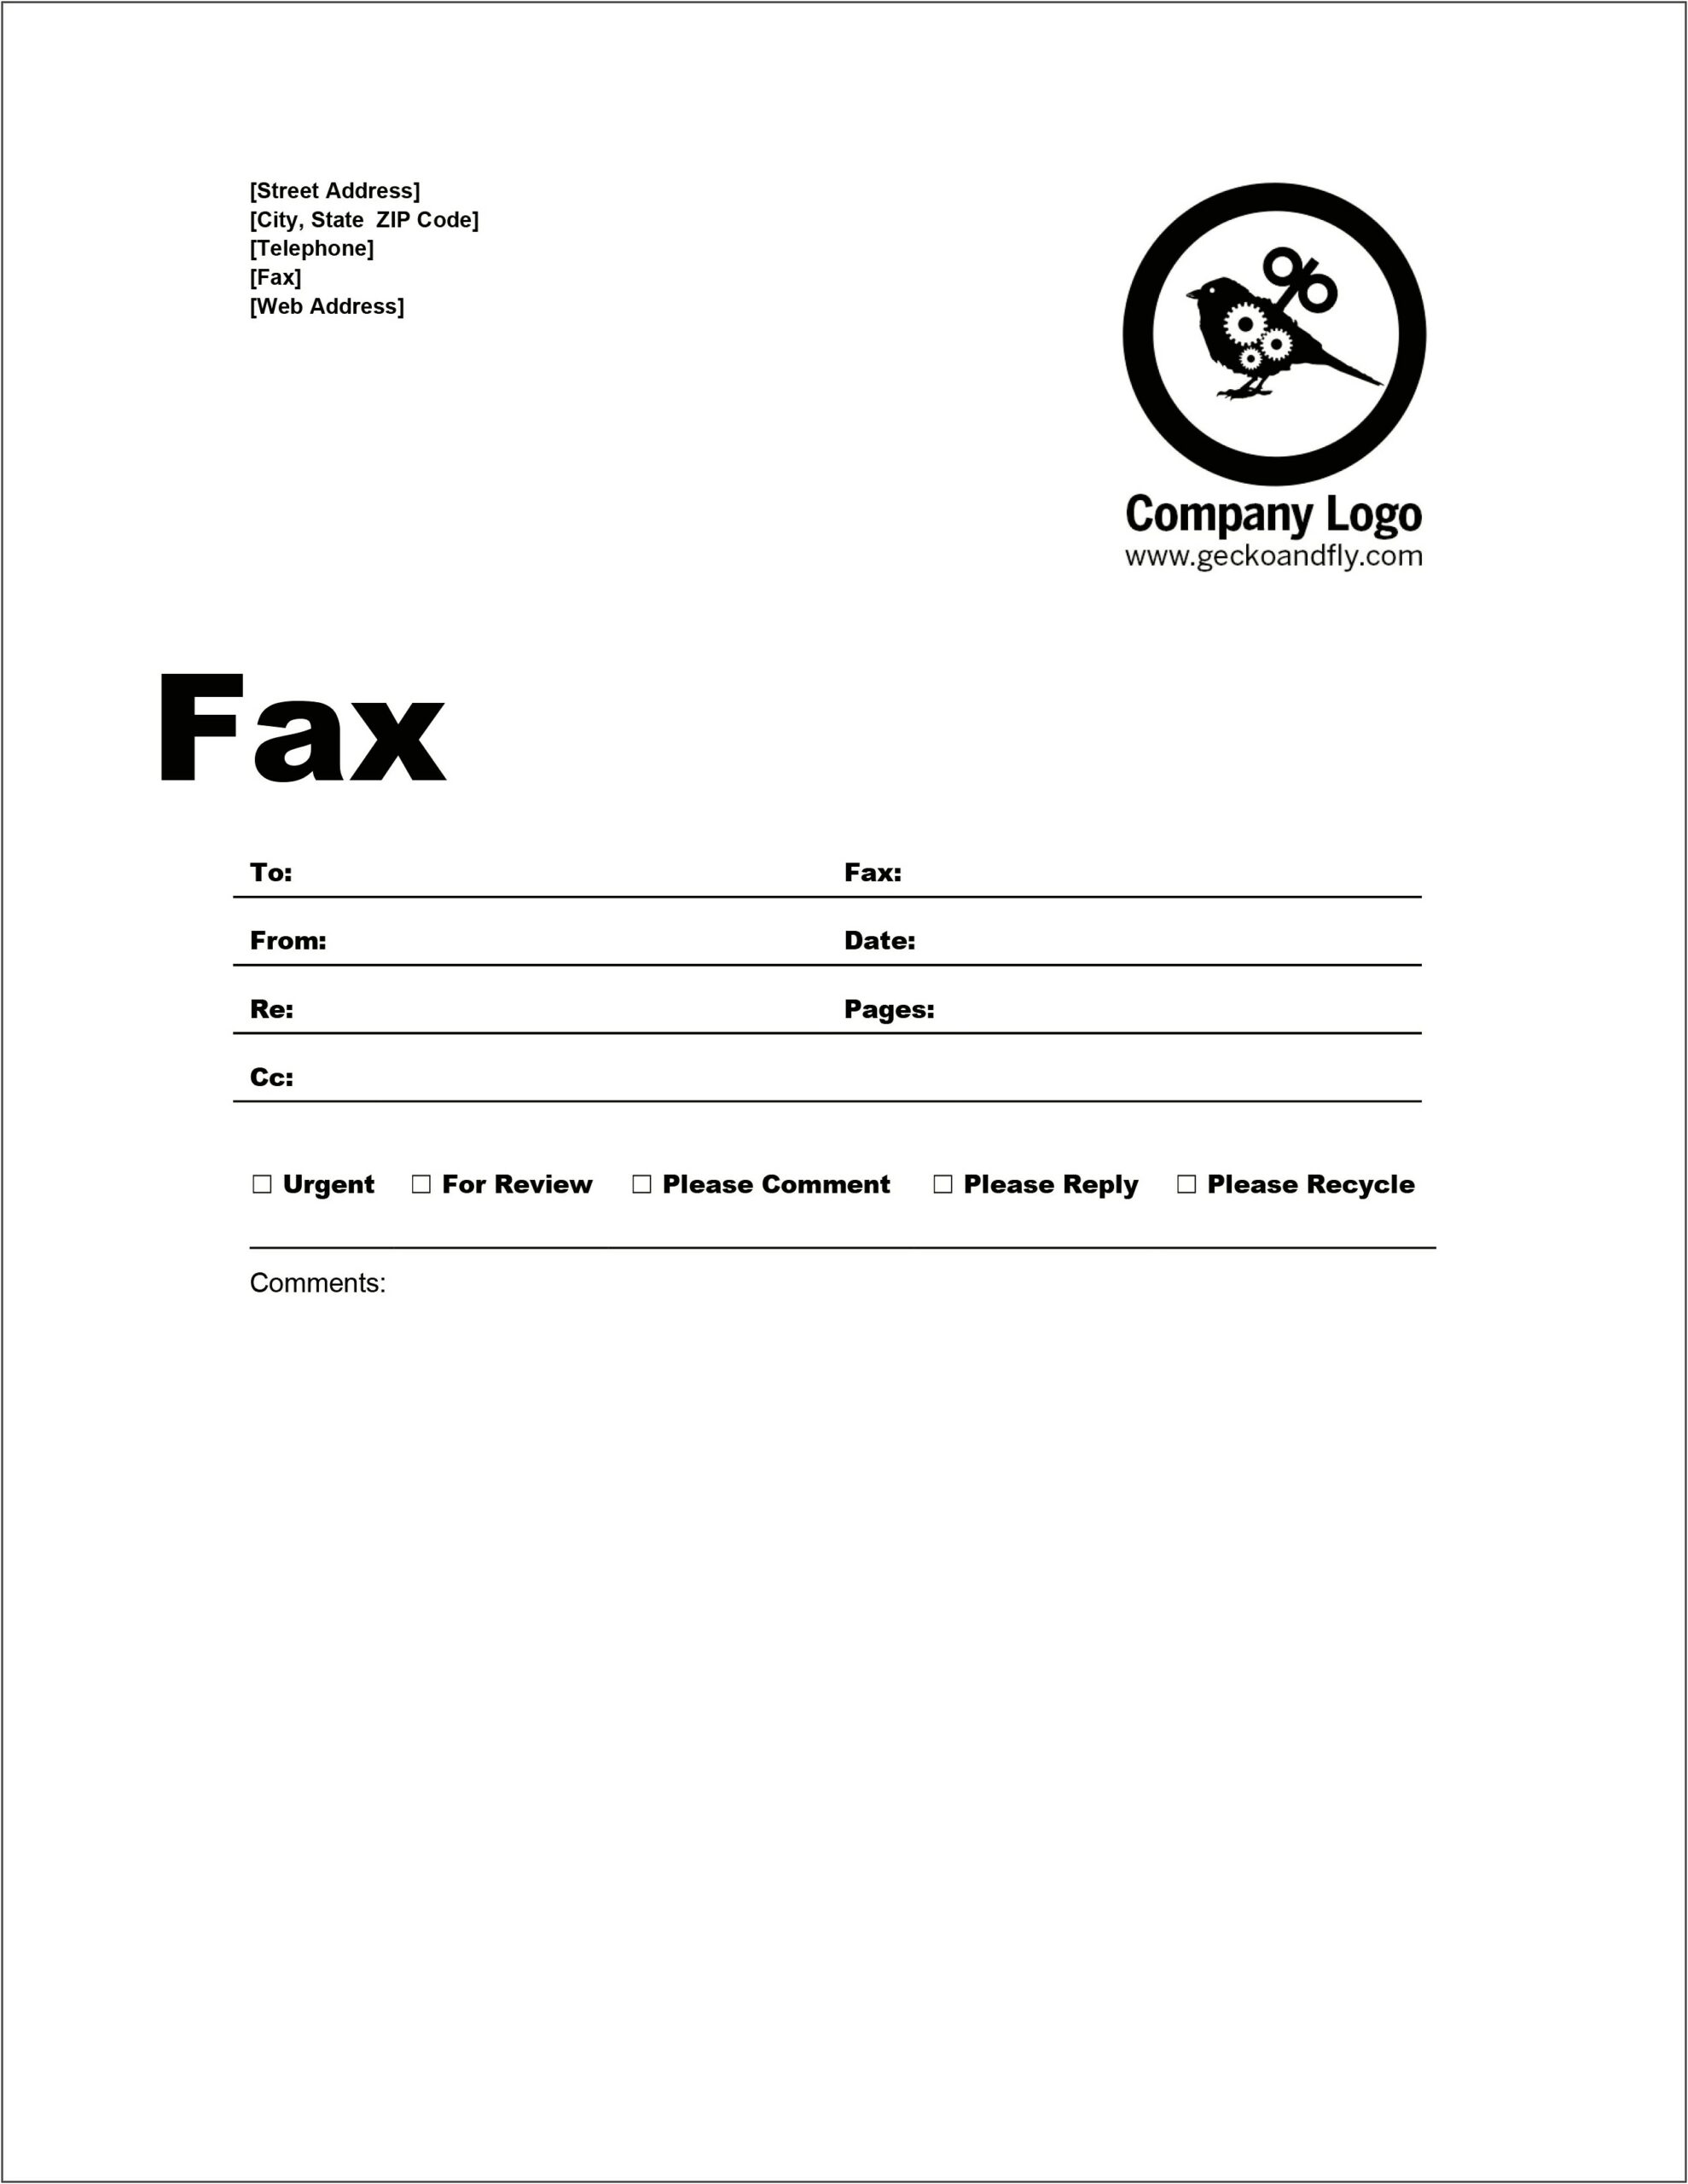 Fax Cover Sheet Template Word 2013